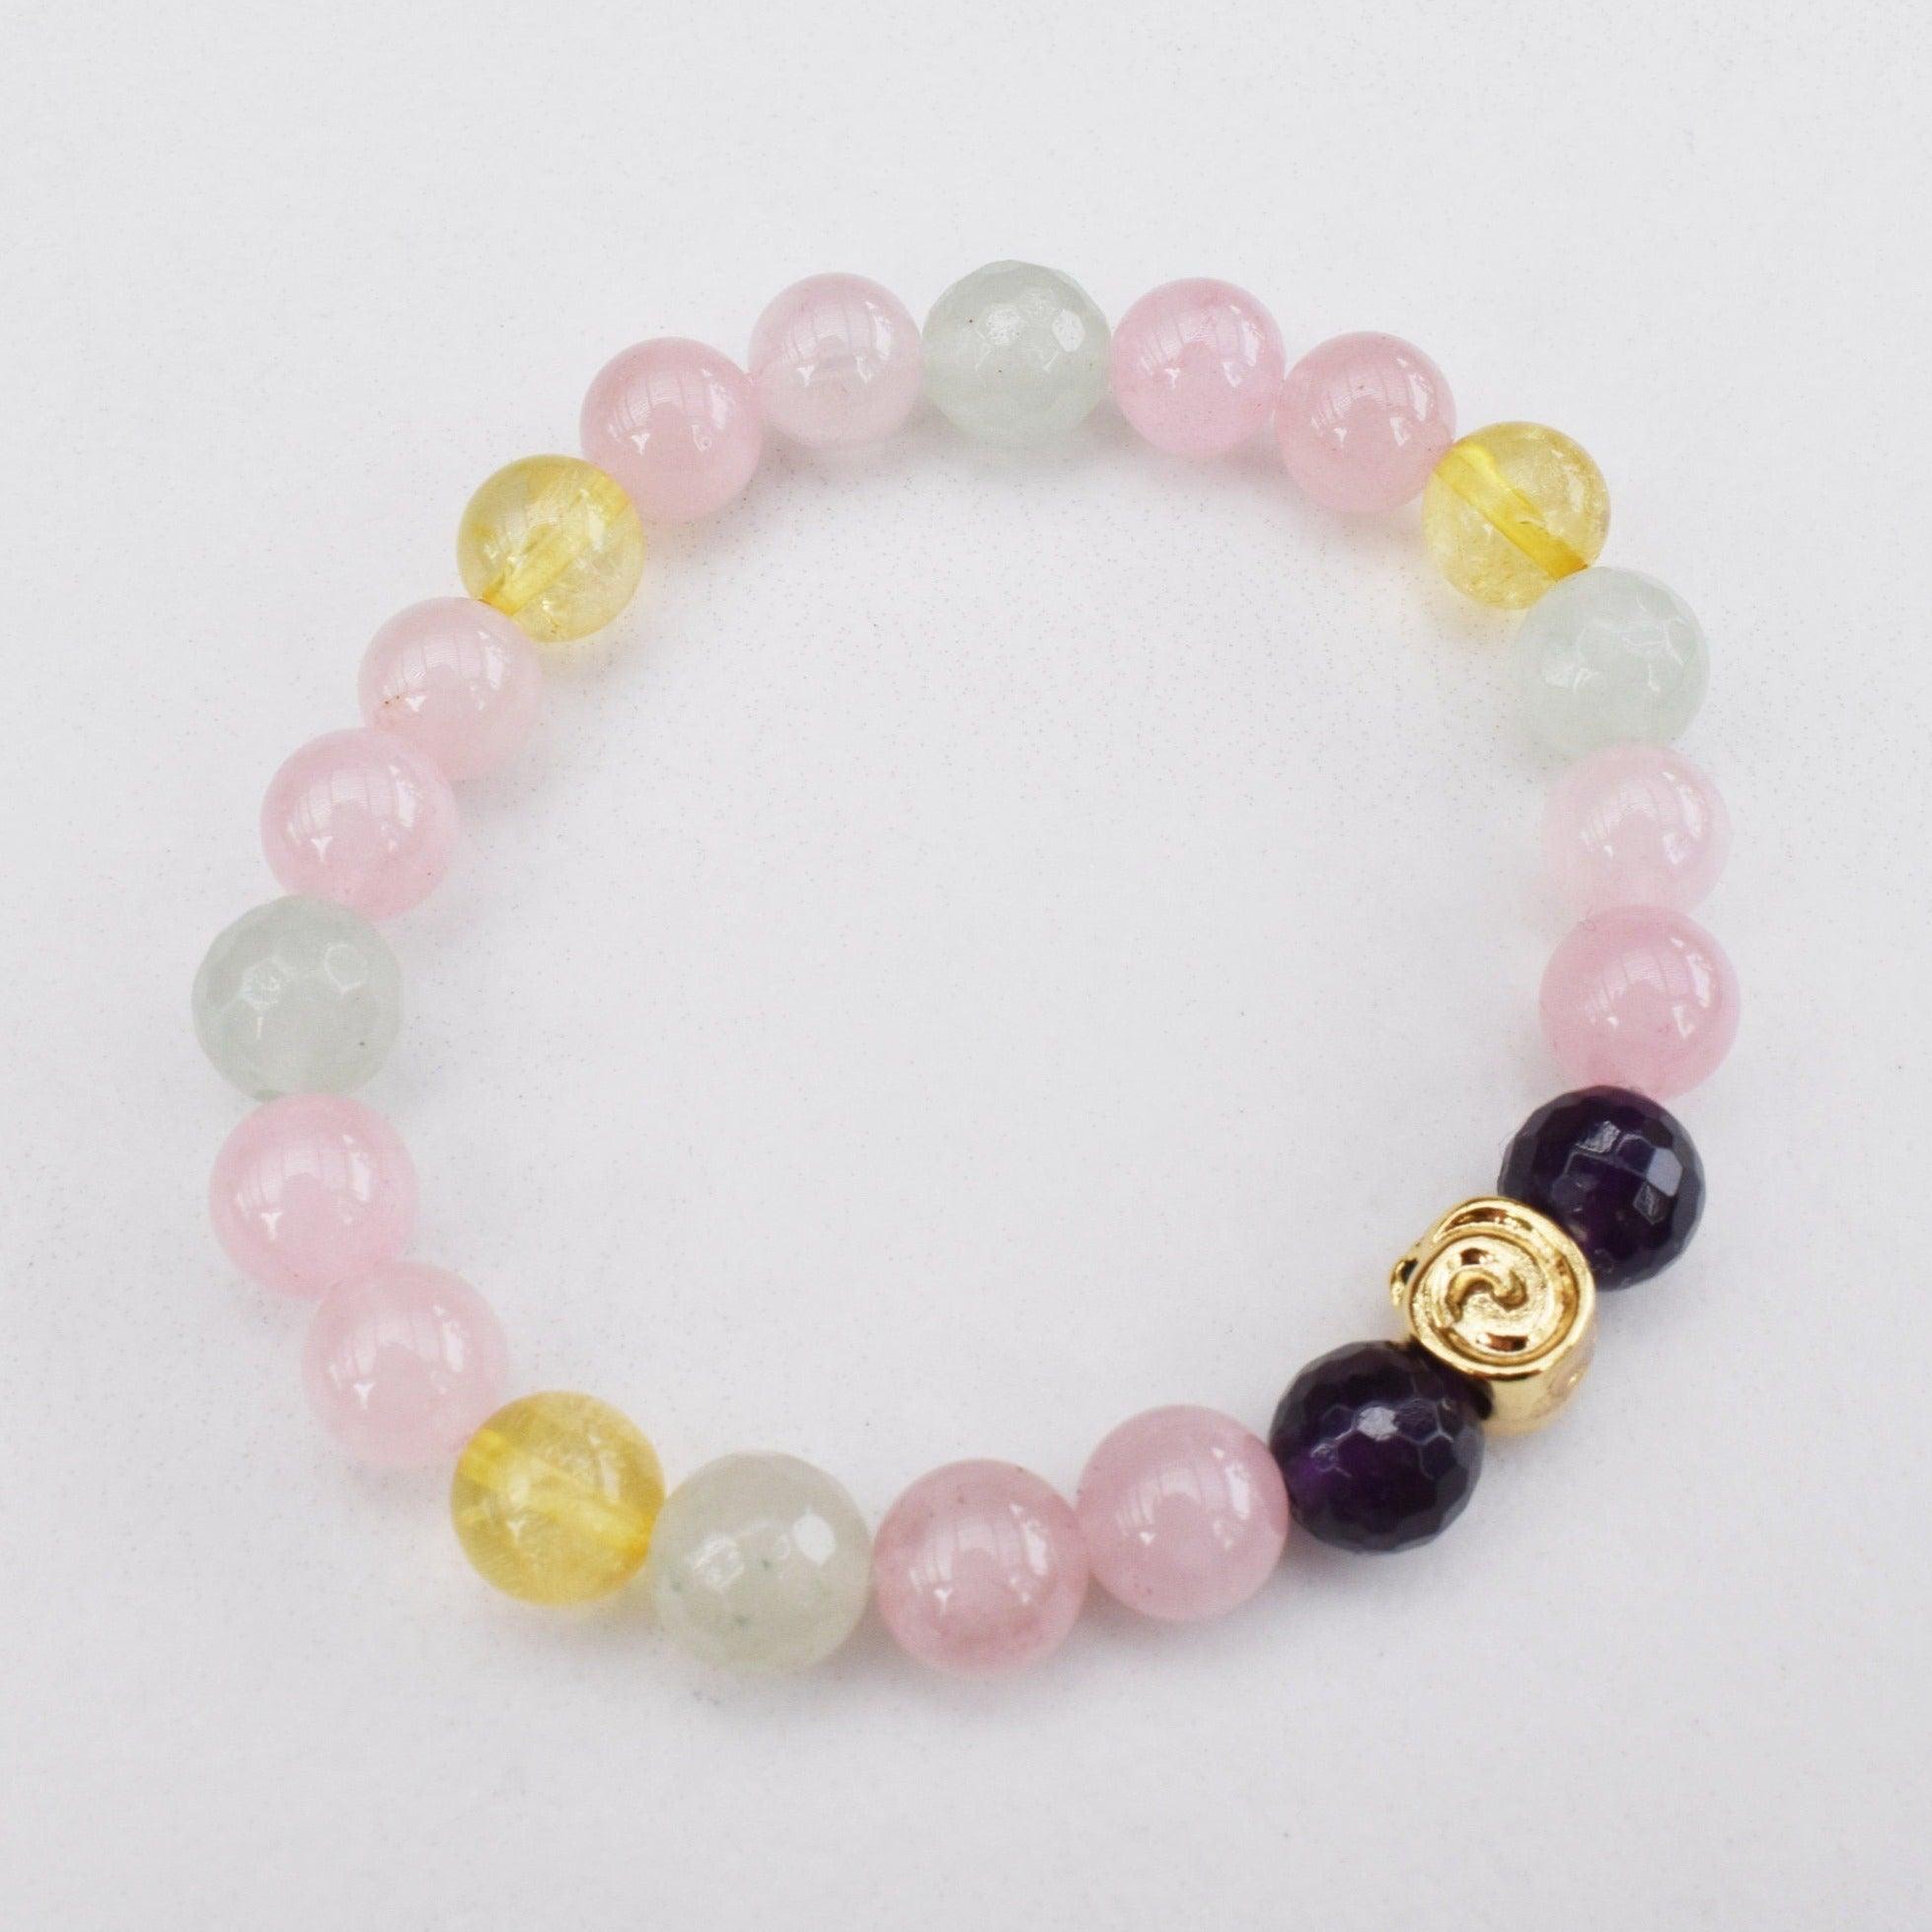 All covered healing gemstone bracelet featuring rose quartz, amethyst, citrine, and green aventurine. Reiki Infused Jewelry to help you bloom your intention. 